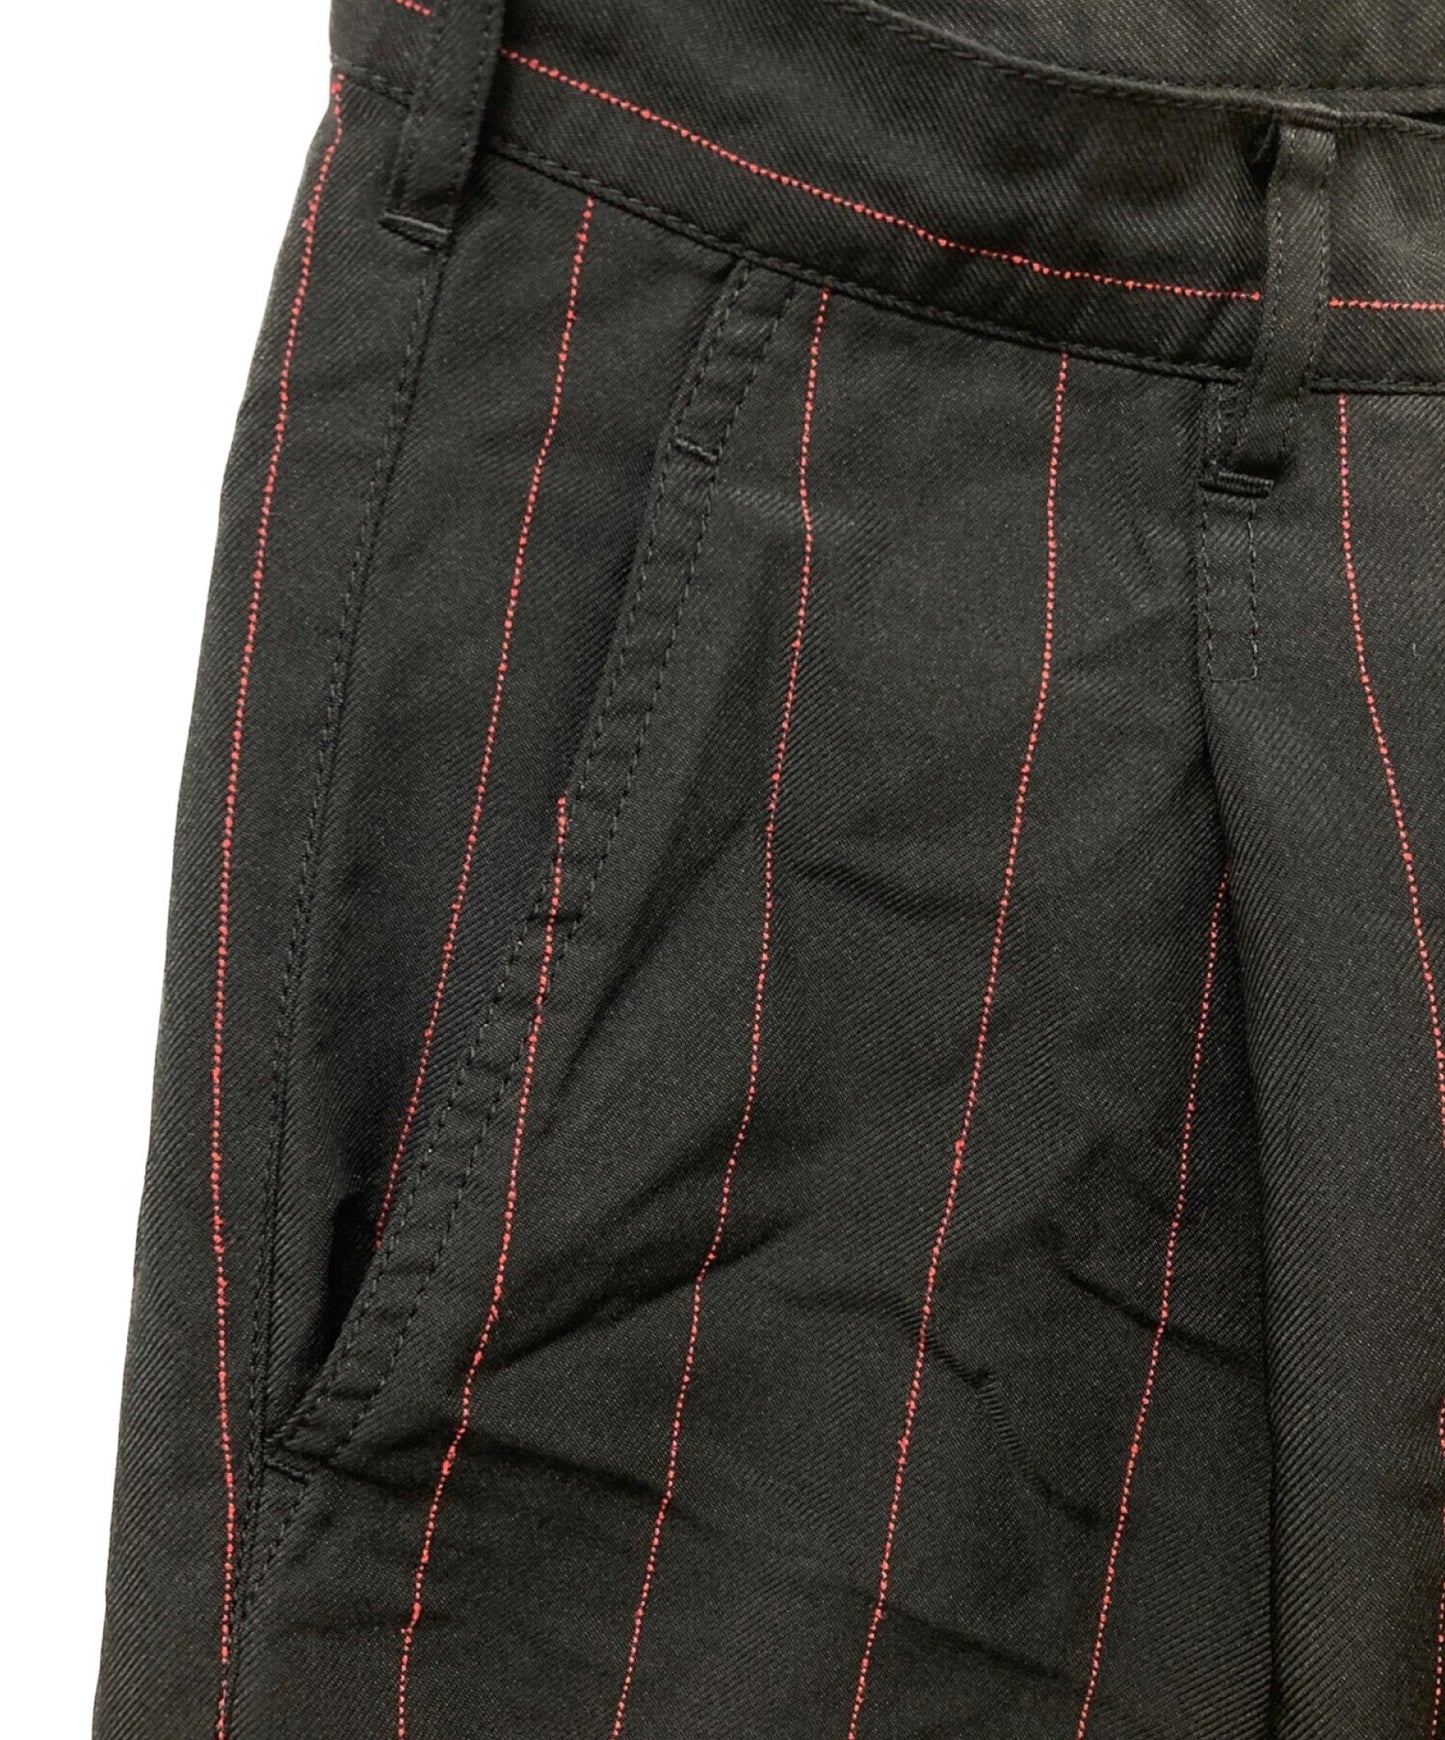 Comme des Garcons Homme Deux 22SS Poly Shrink-Wrap Striped Tuck Tapered Pants DI-P030